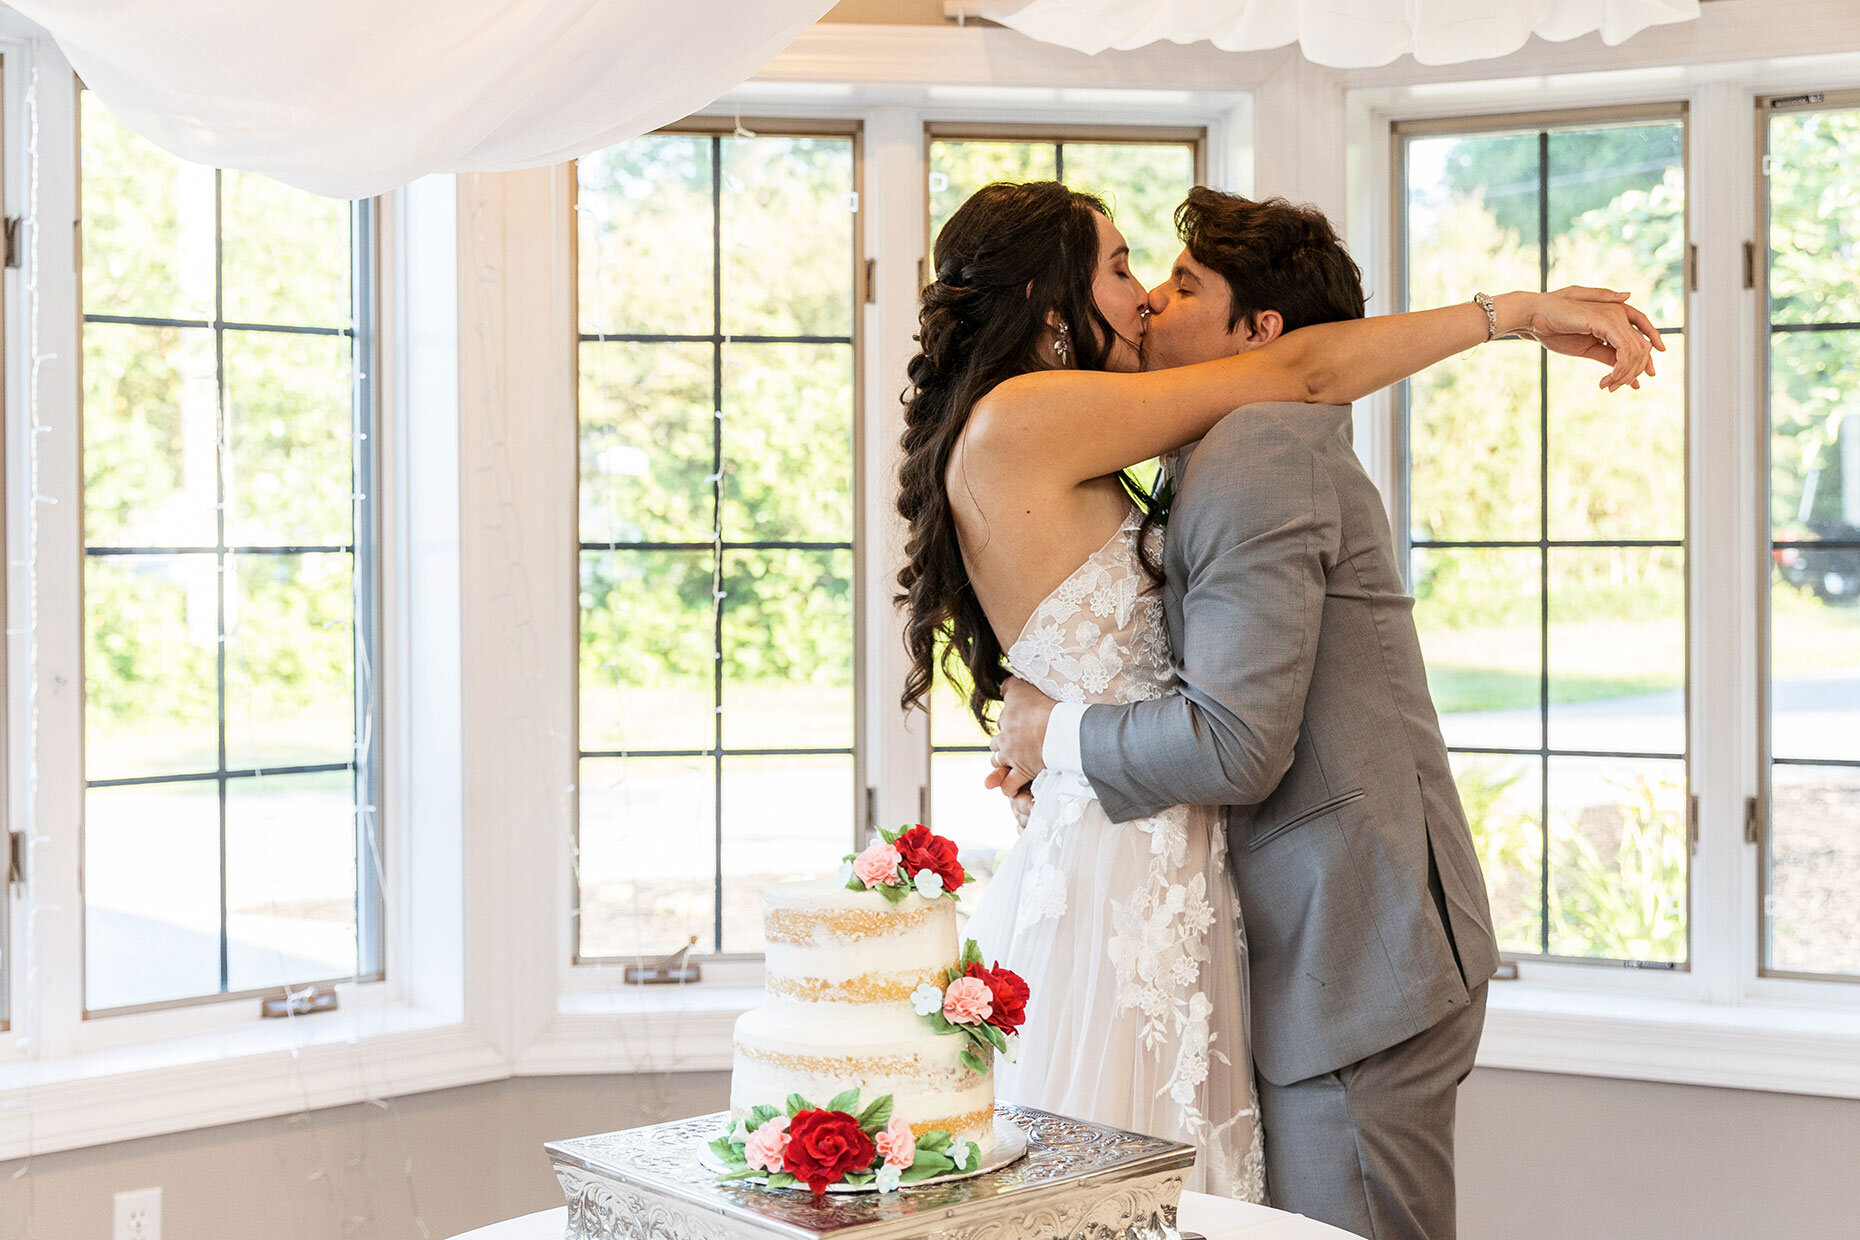 Kiss after cake cutting